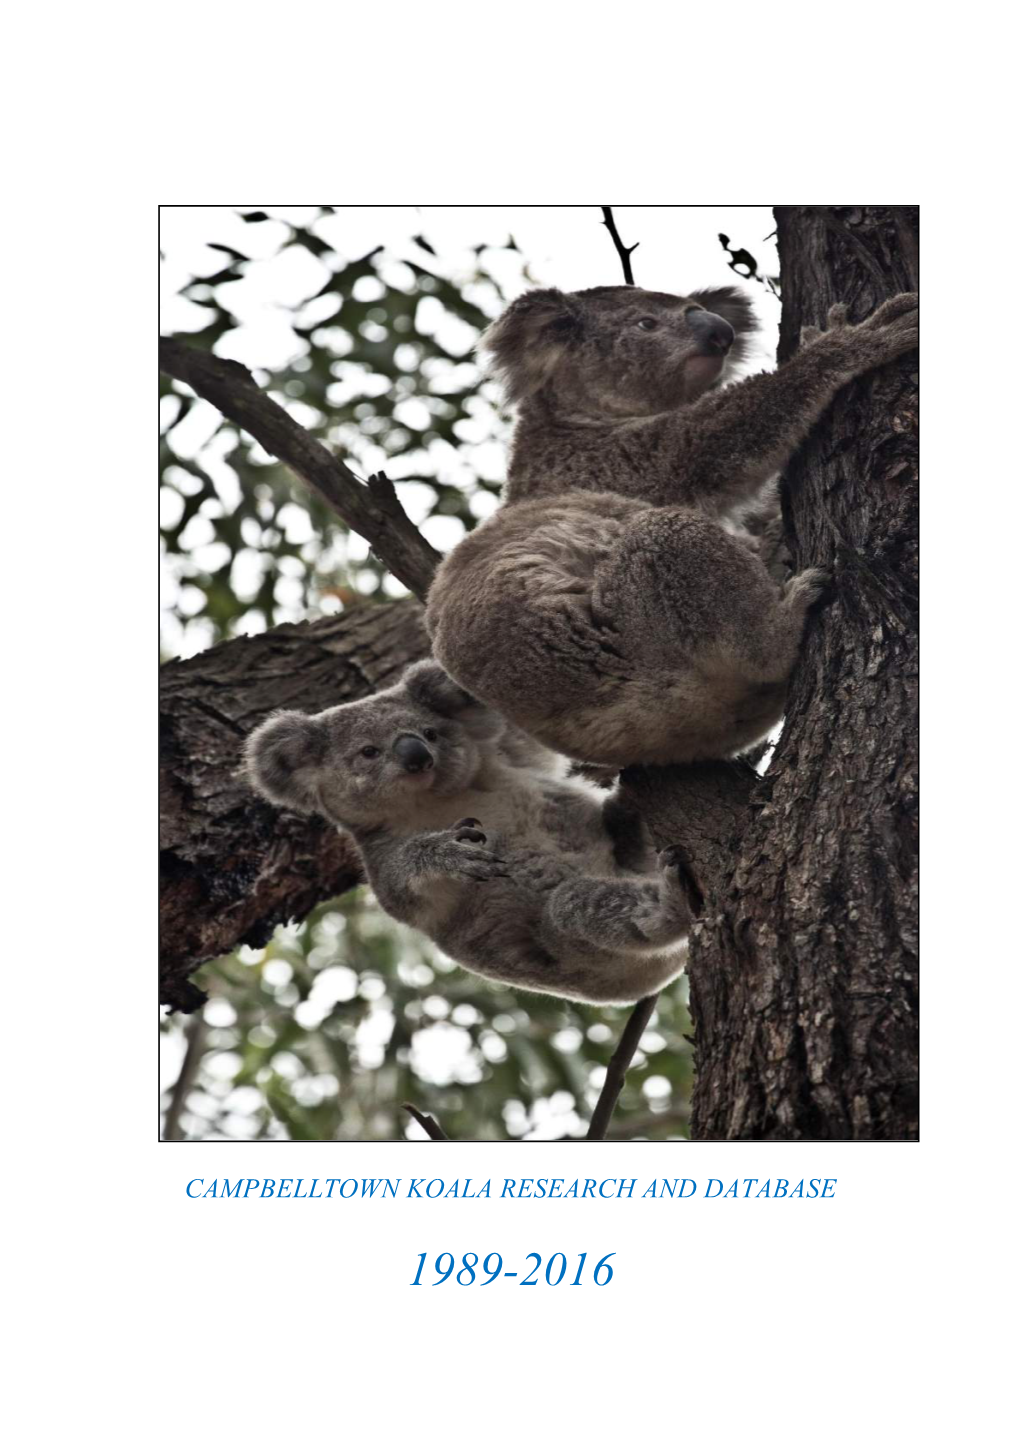 Campbelltown Koala Research and Database